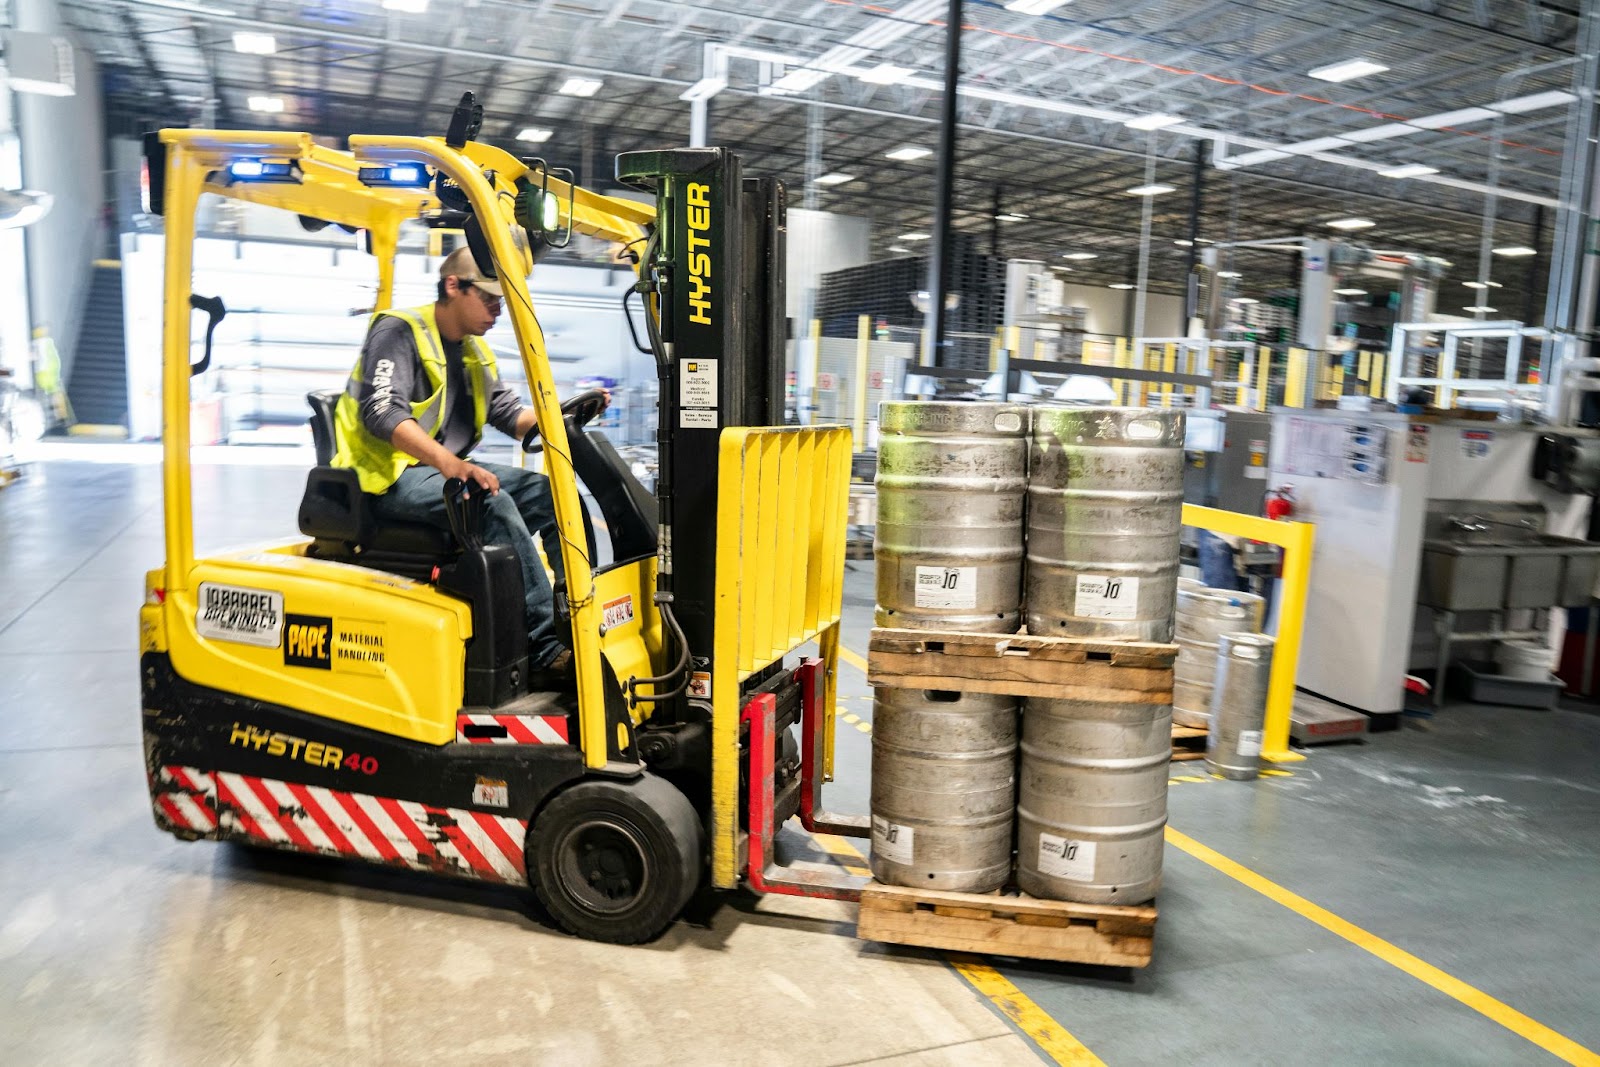 A class II forklift lifting steel drums in a warehouse